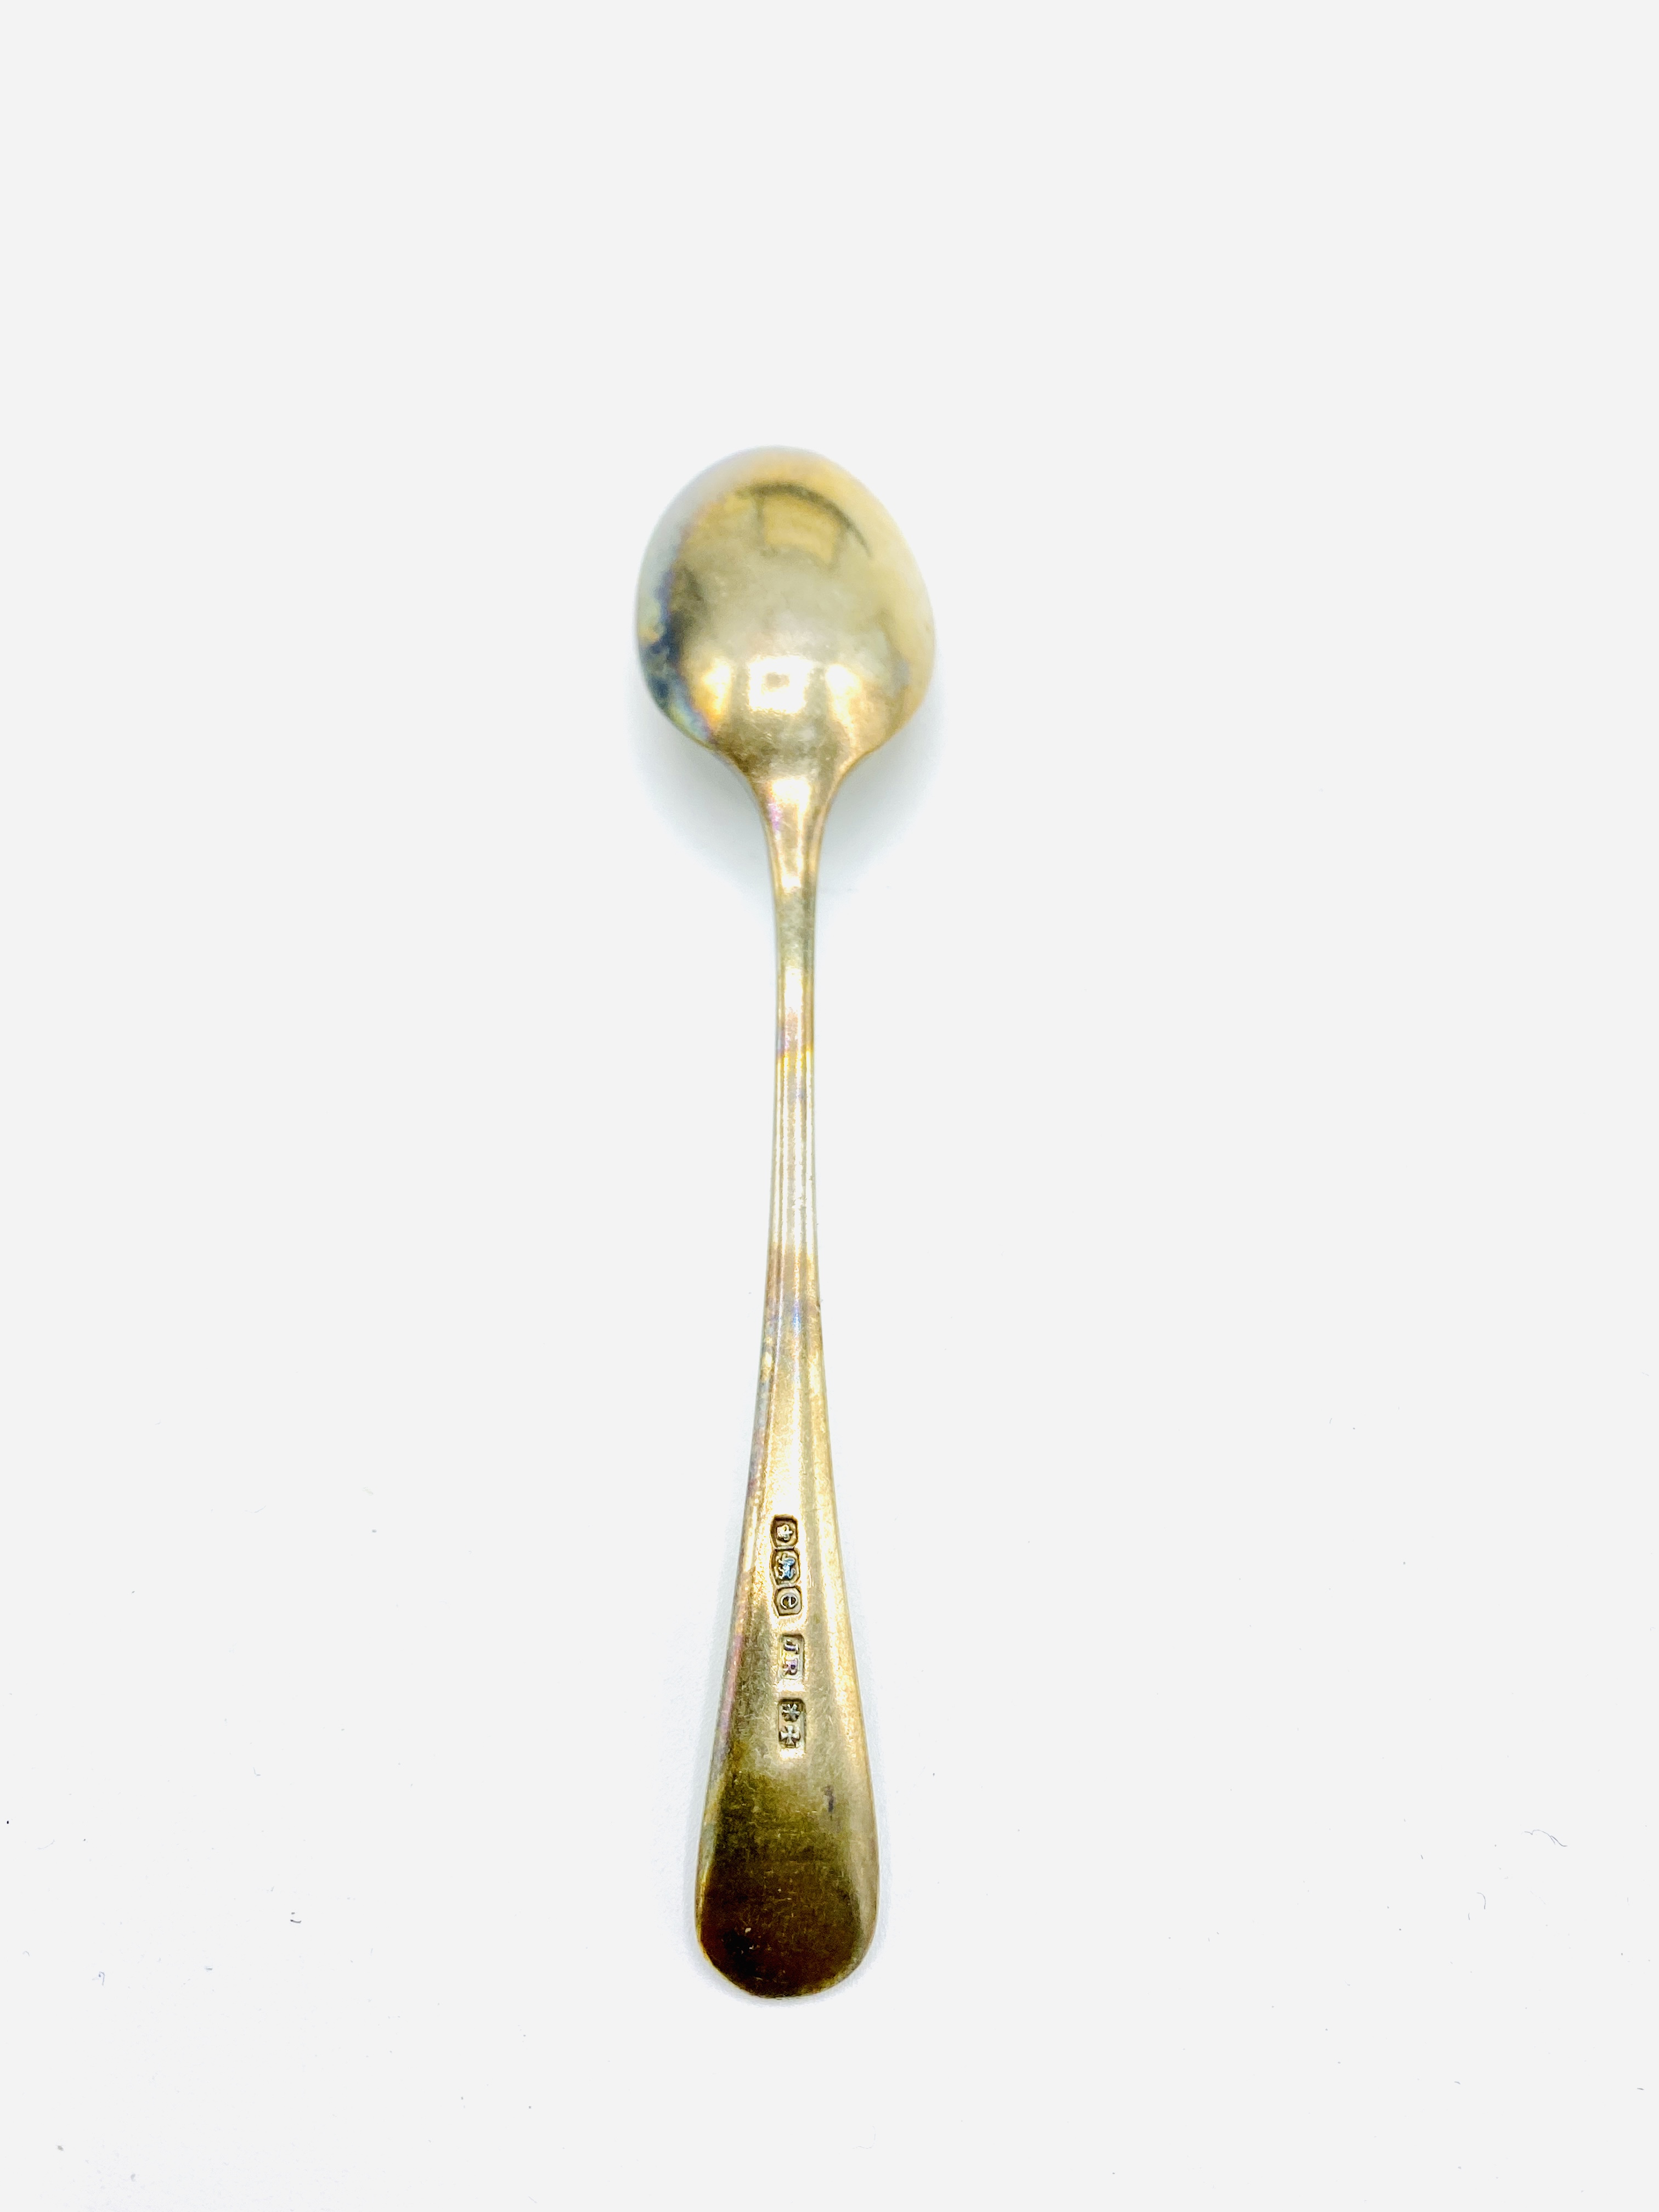 Six silver coffee spoons - Image 3 of 3